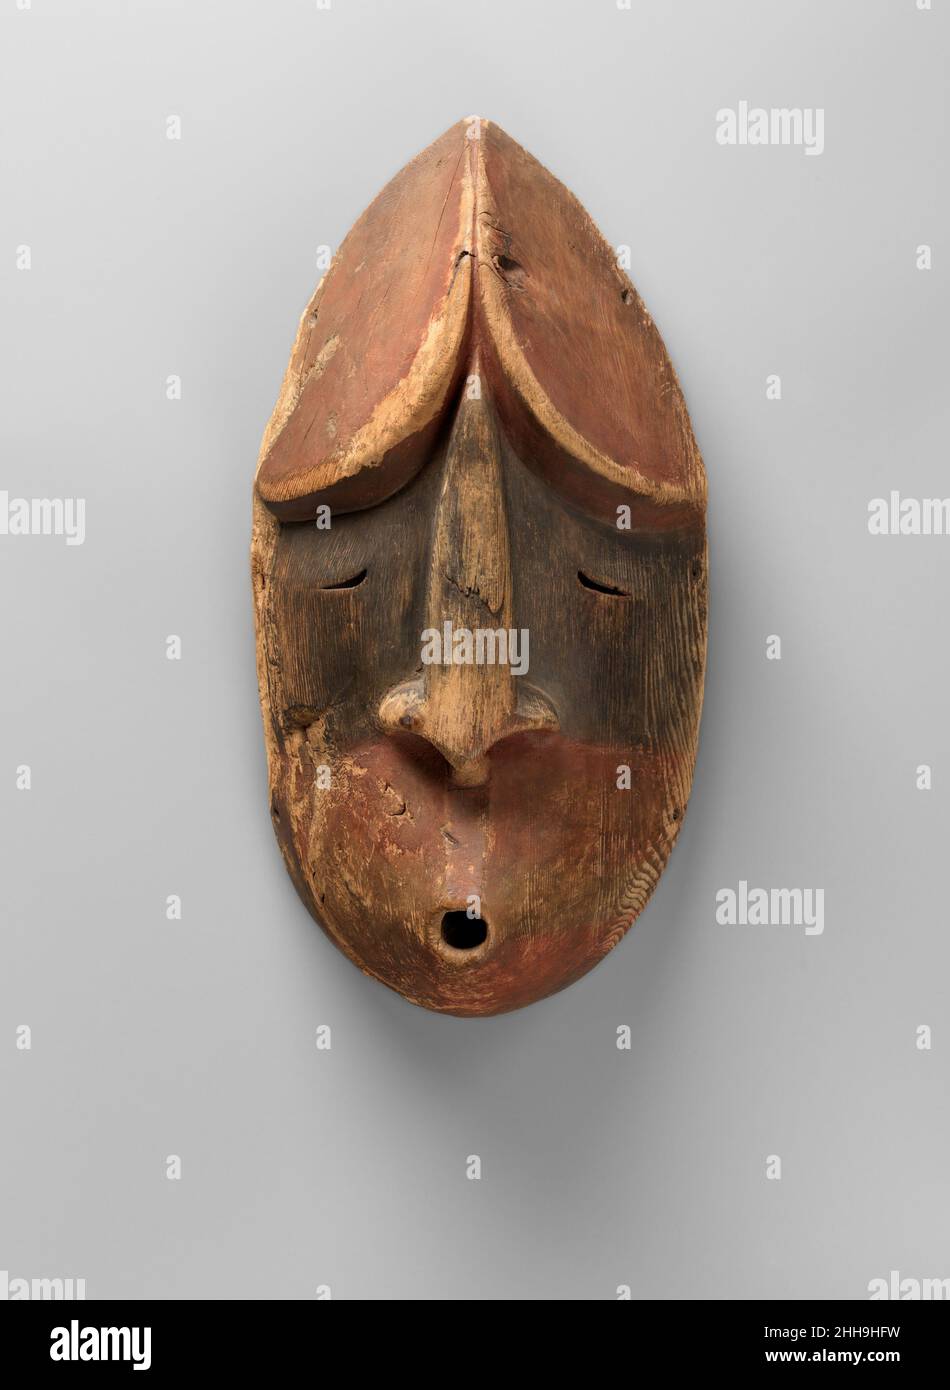 Mask ca. 1870 Alutiiq/ Sugpiaq, Native American The peoples of the Arctic region use music and performance to invoke the spirit realm. According to native Alaskan beliefs, spirits communicate with people through whistling: these masks may be the faces of such supernatural beings, as they appear to whistle at their beholders. The formal resemblance between the pair, including the prominent noses, minimal eyes, and pointed head decorations, may mark them as specific, linked characters in a myth. Early twentieth-century modernist artists and collectors were drawn to the bold simplicity of such wo Stock Photo